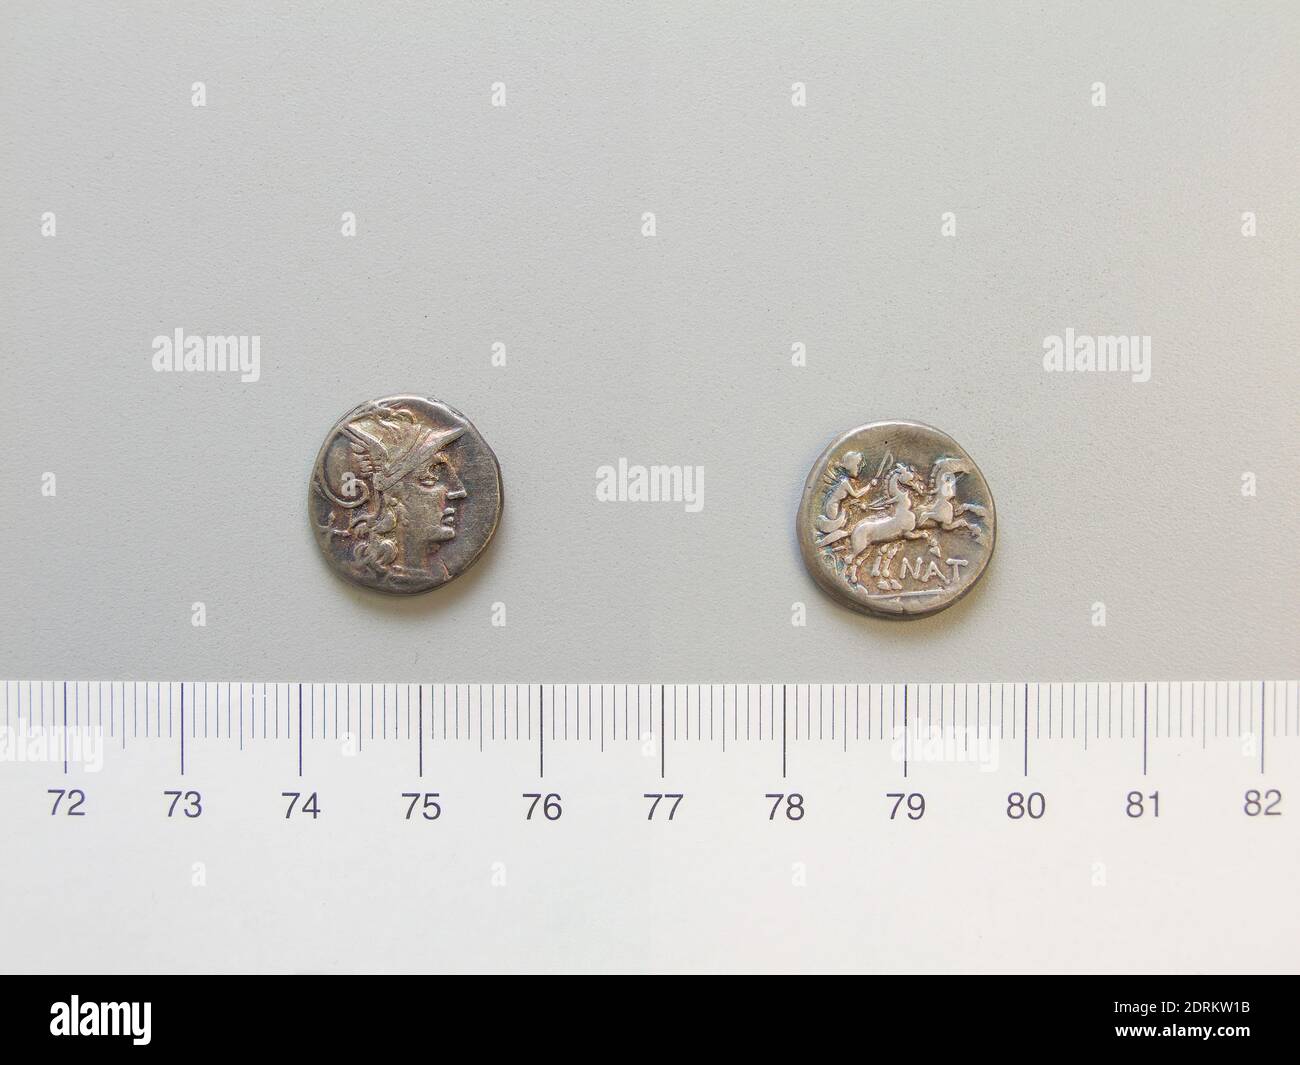 Mint: Rome, Magistrate: NAT, Denarius from Rome, 155 B.C., Silver, 3.76 g, 1:00, 17 mm, Made in Rome, Italy, Roman, 2nd century B.C., Numismatics Stock Photo